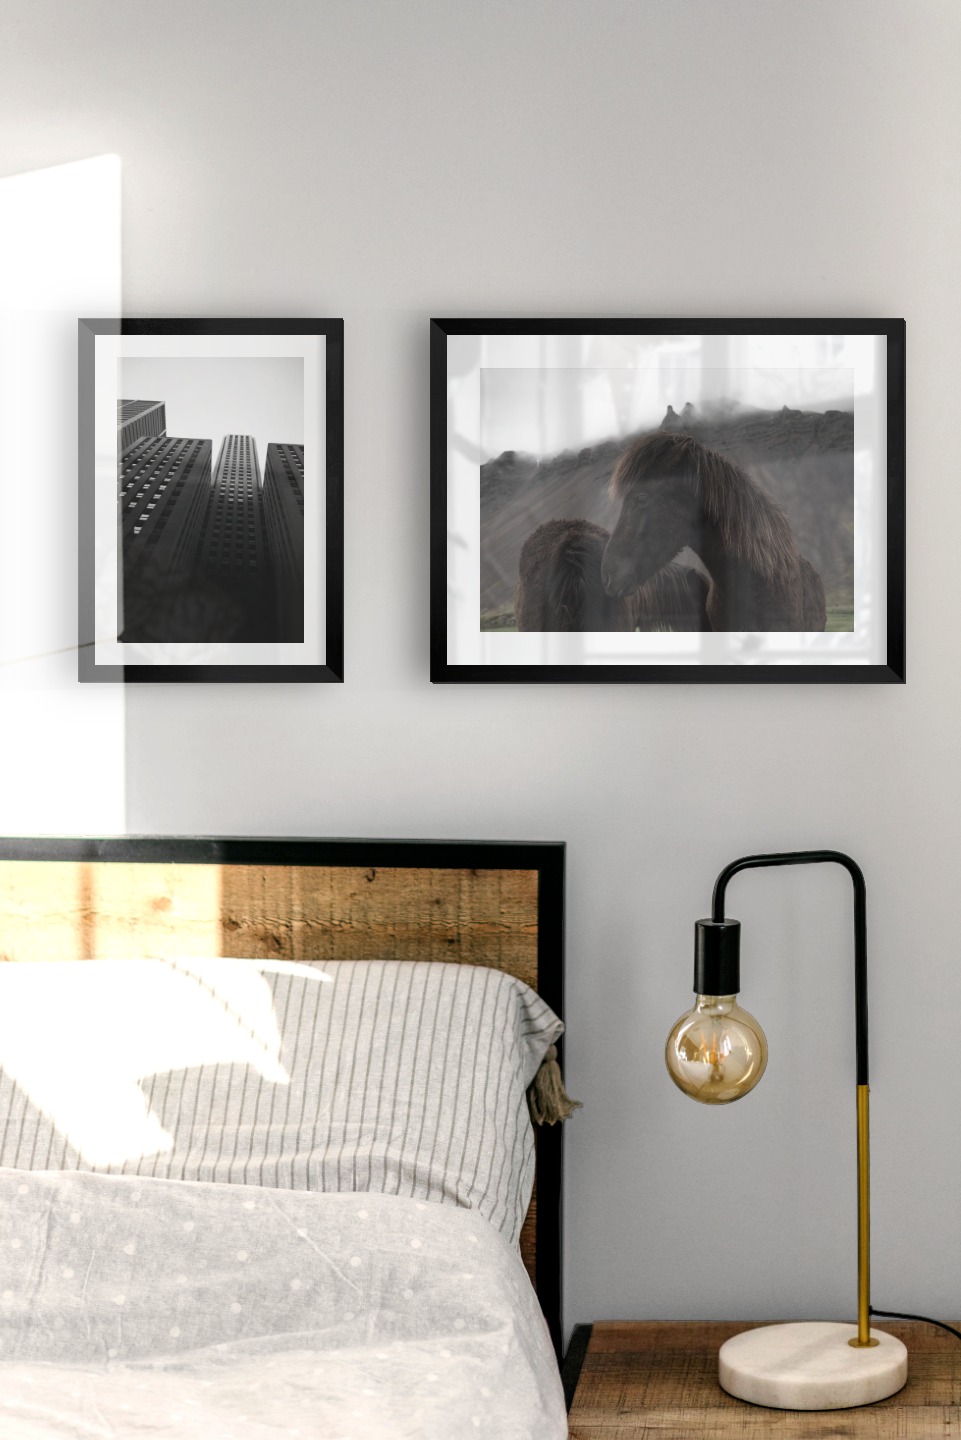 Gallery wall with picture frames in black in sizes 21x30 and 30x40 with prints "Golden Gate Bridge", "High buildings" and "Icelandic horses"